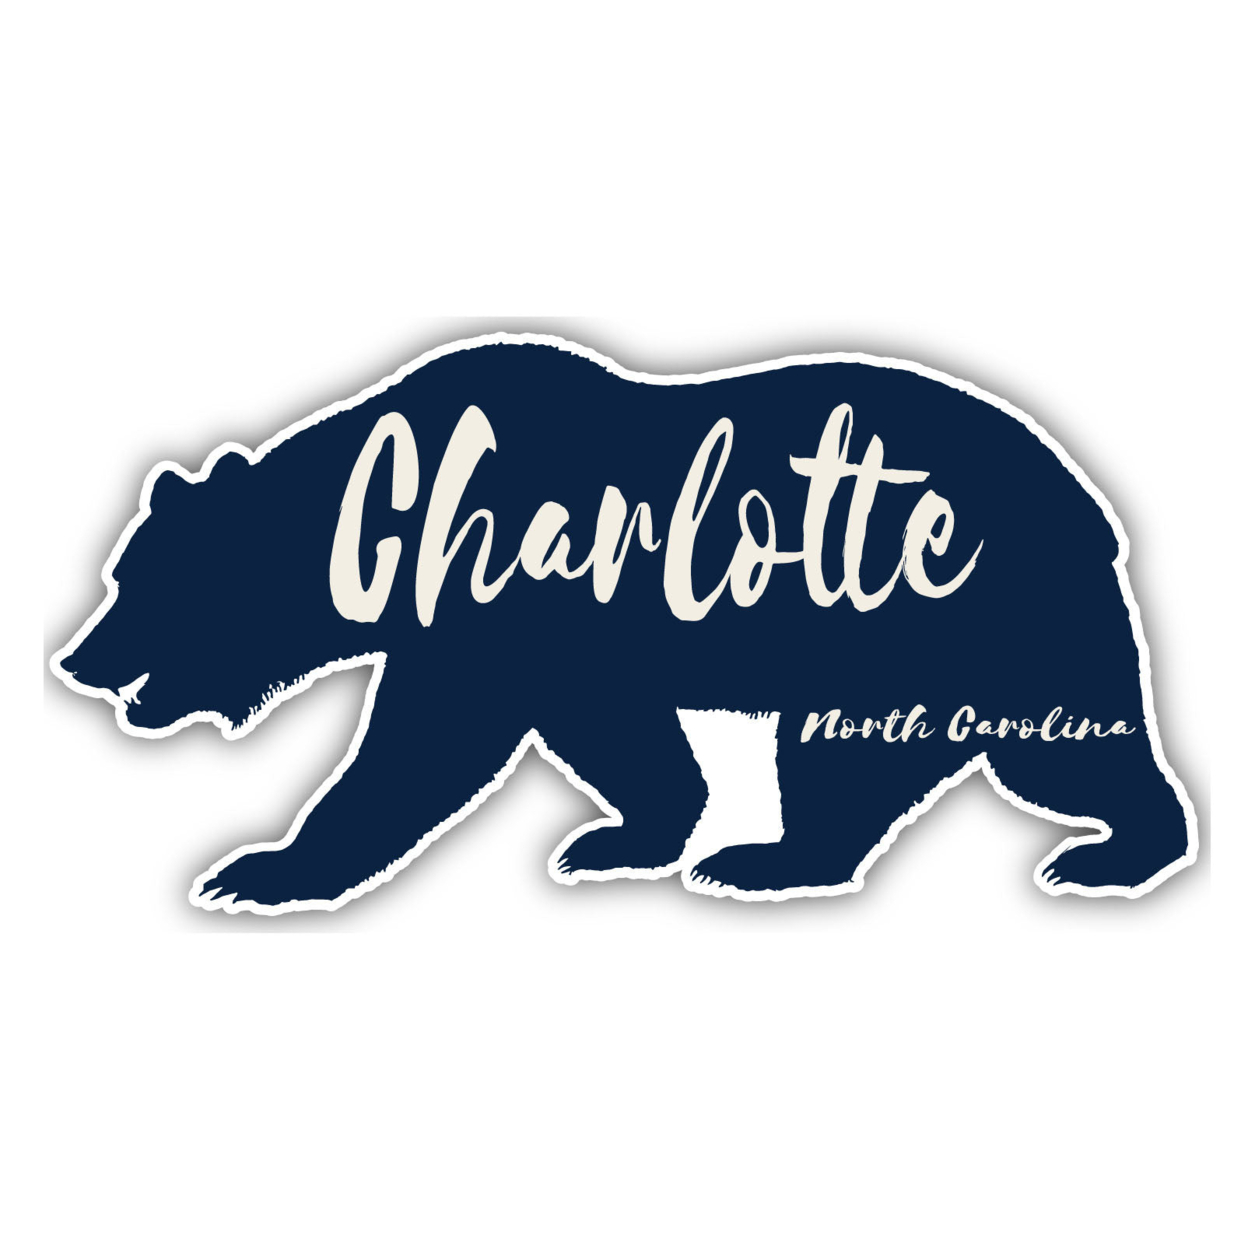 Charlotte North Carolina Souvenir Decorative Stickers (Choose Theme And Size) - 4-Pack, 6-Inch, Great Outdoors